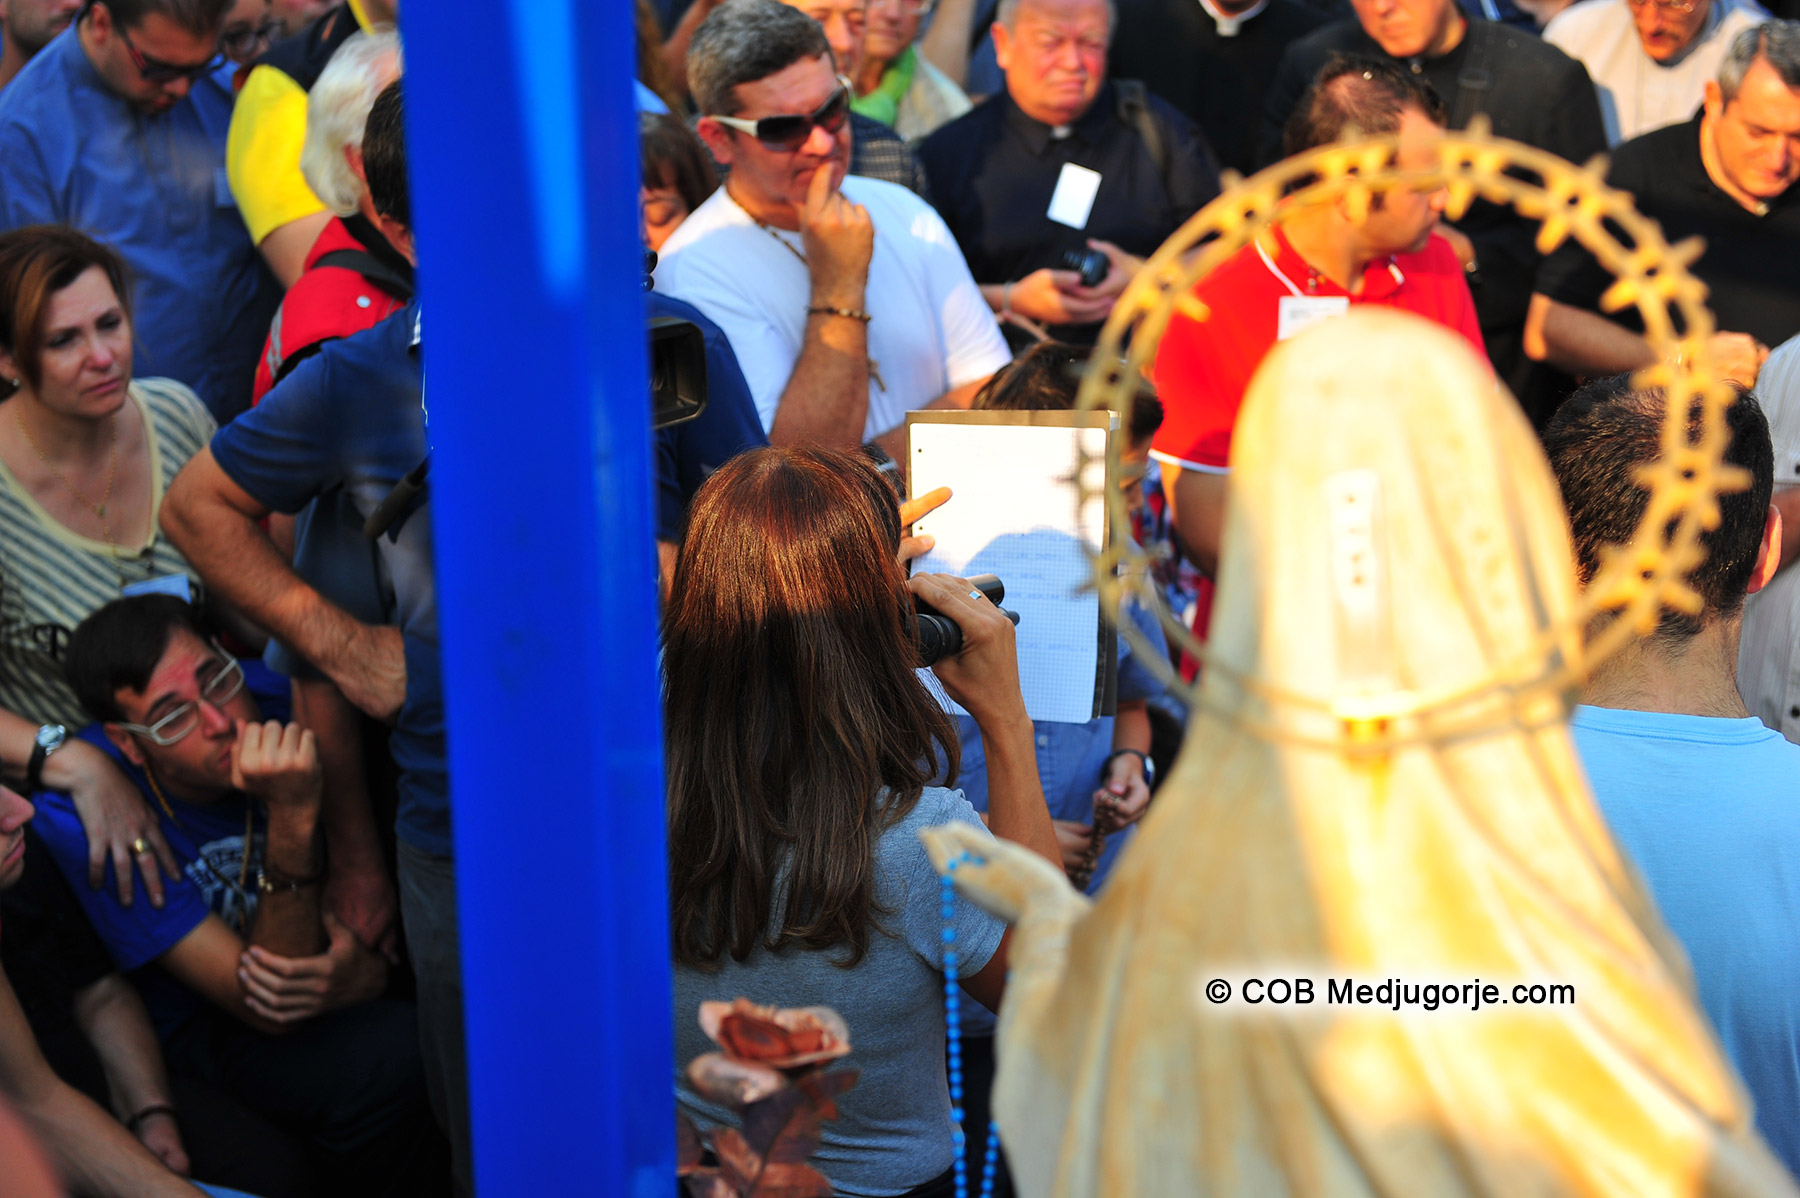 Message of Our Lady being read to the crowd September 2, 2012